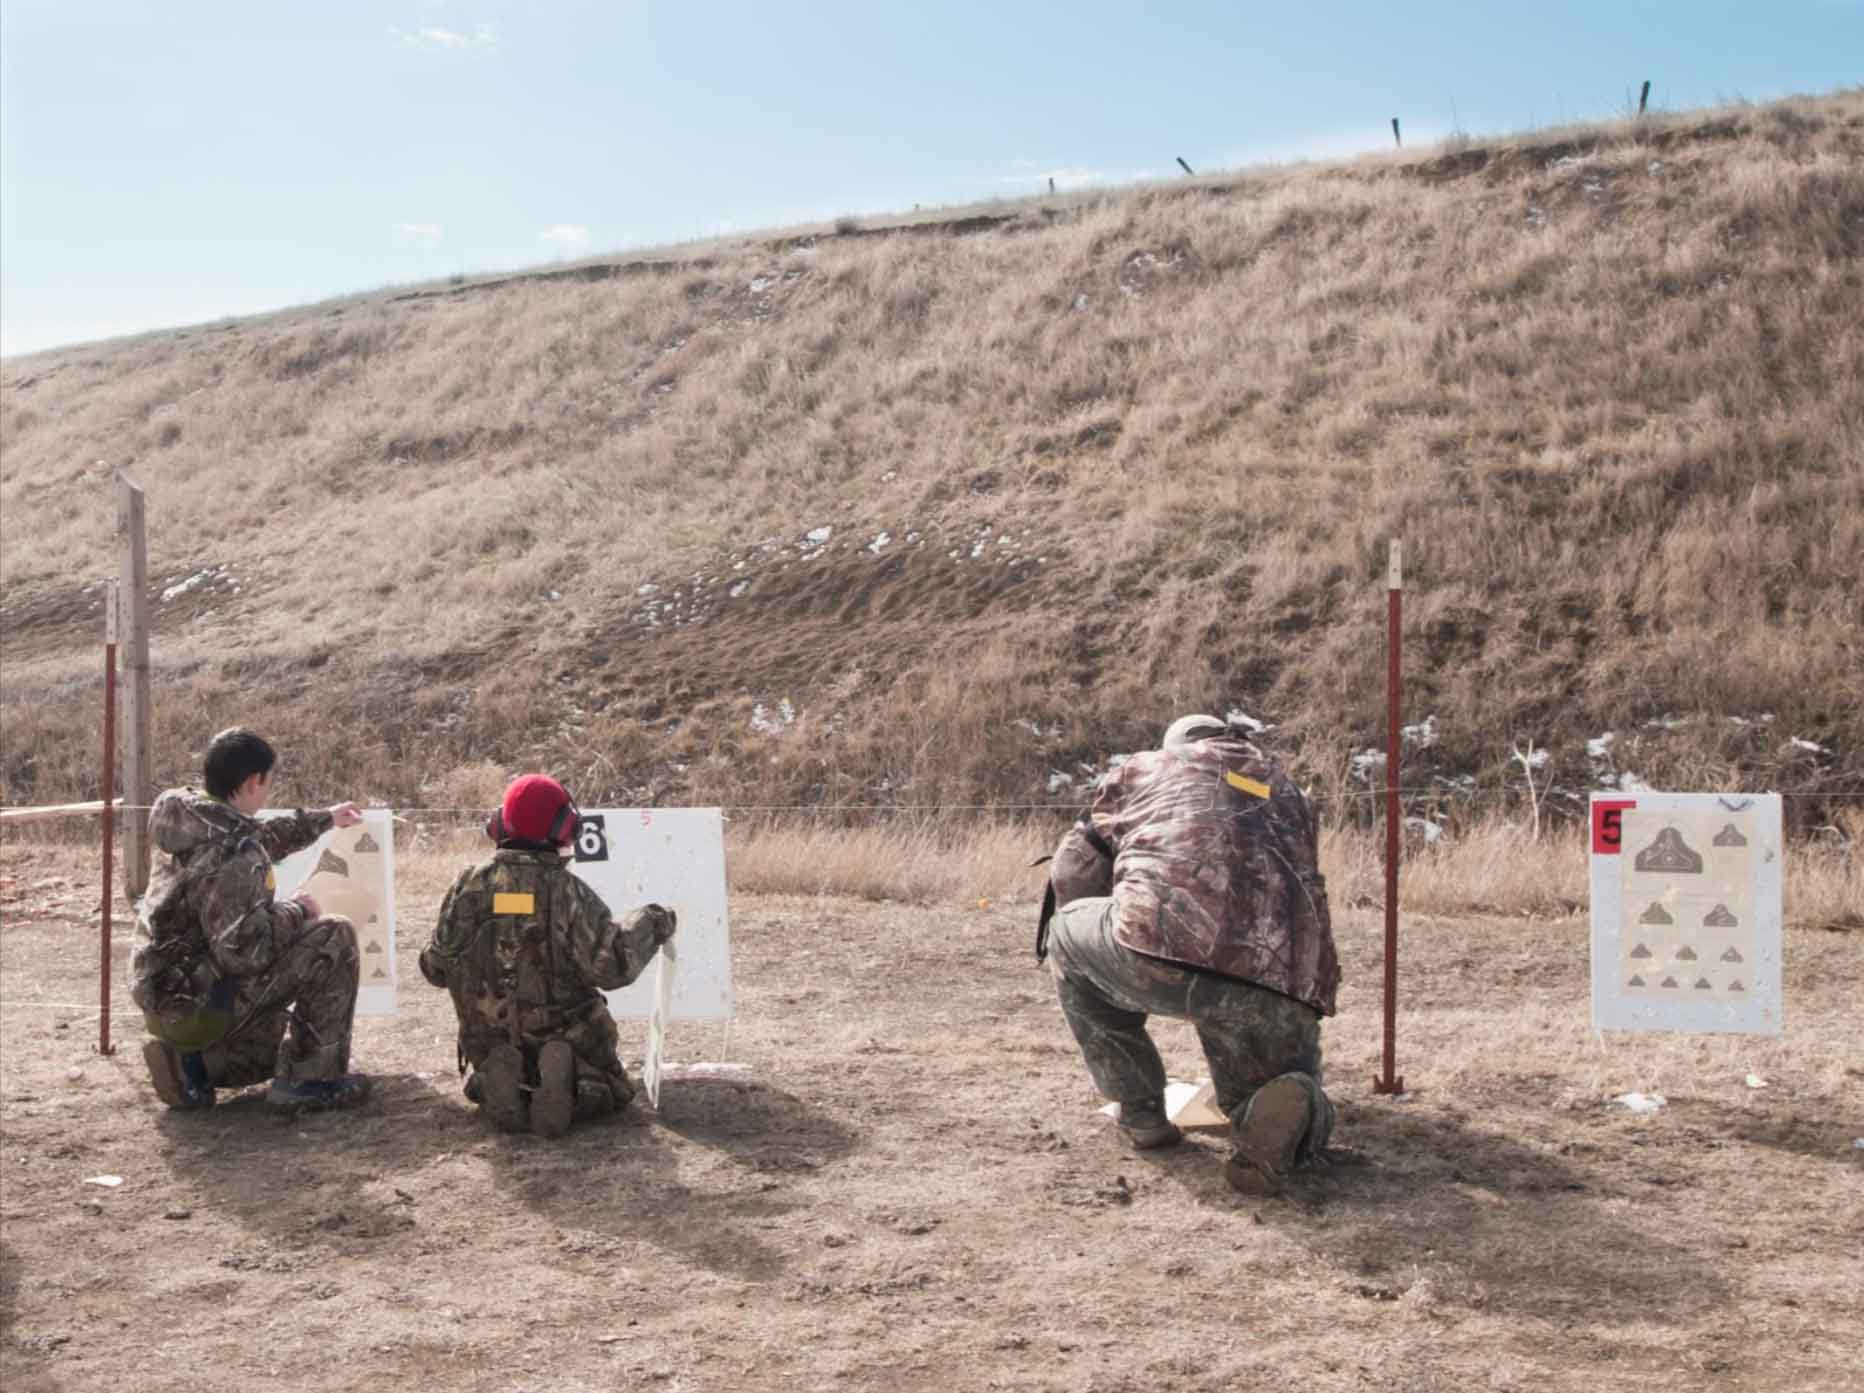 Two young boys and an adult examine their targets after shooting them.